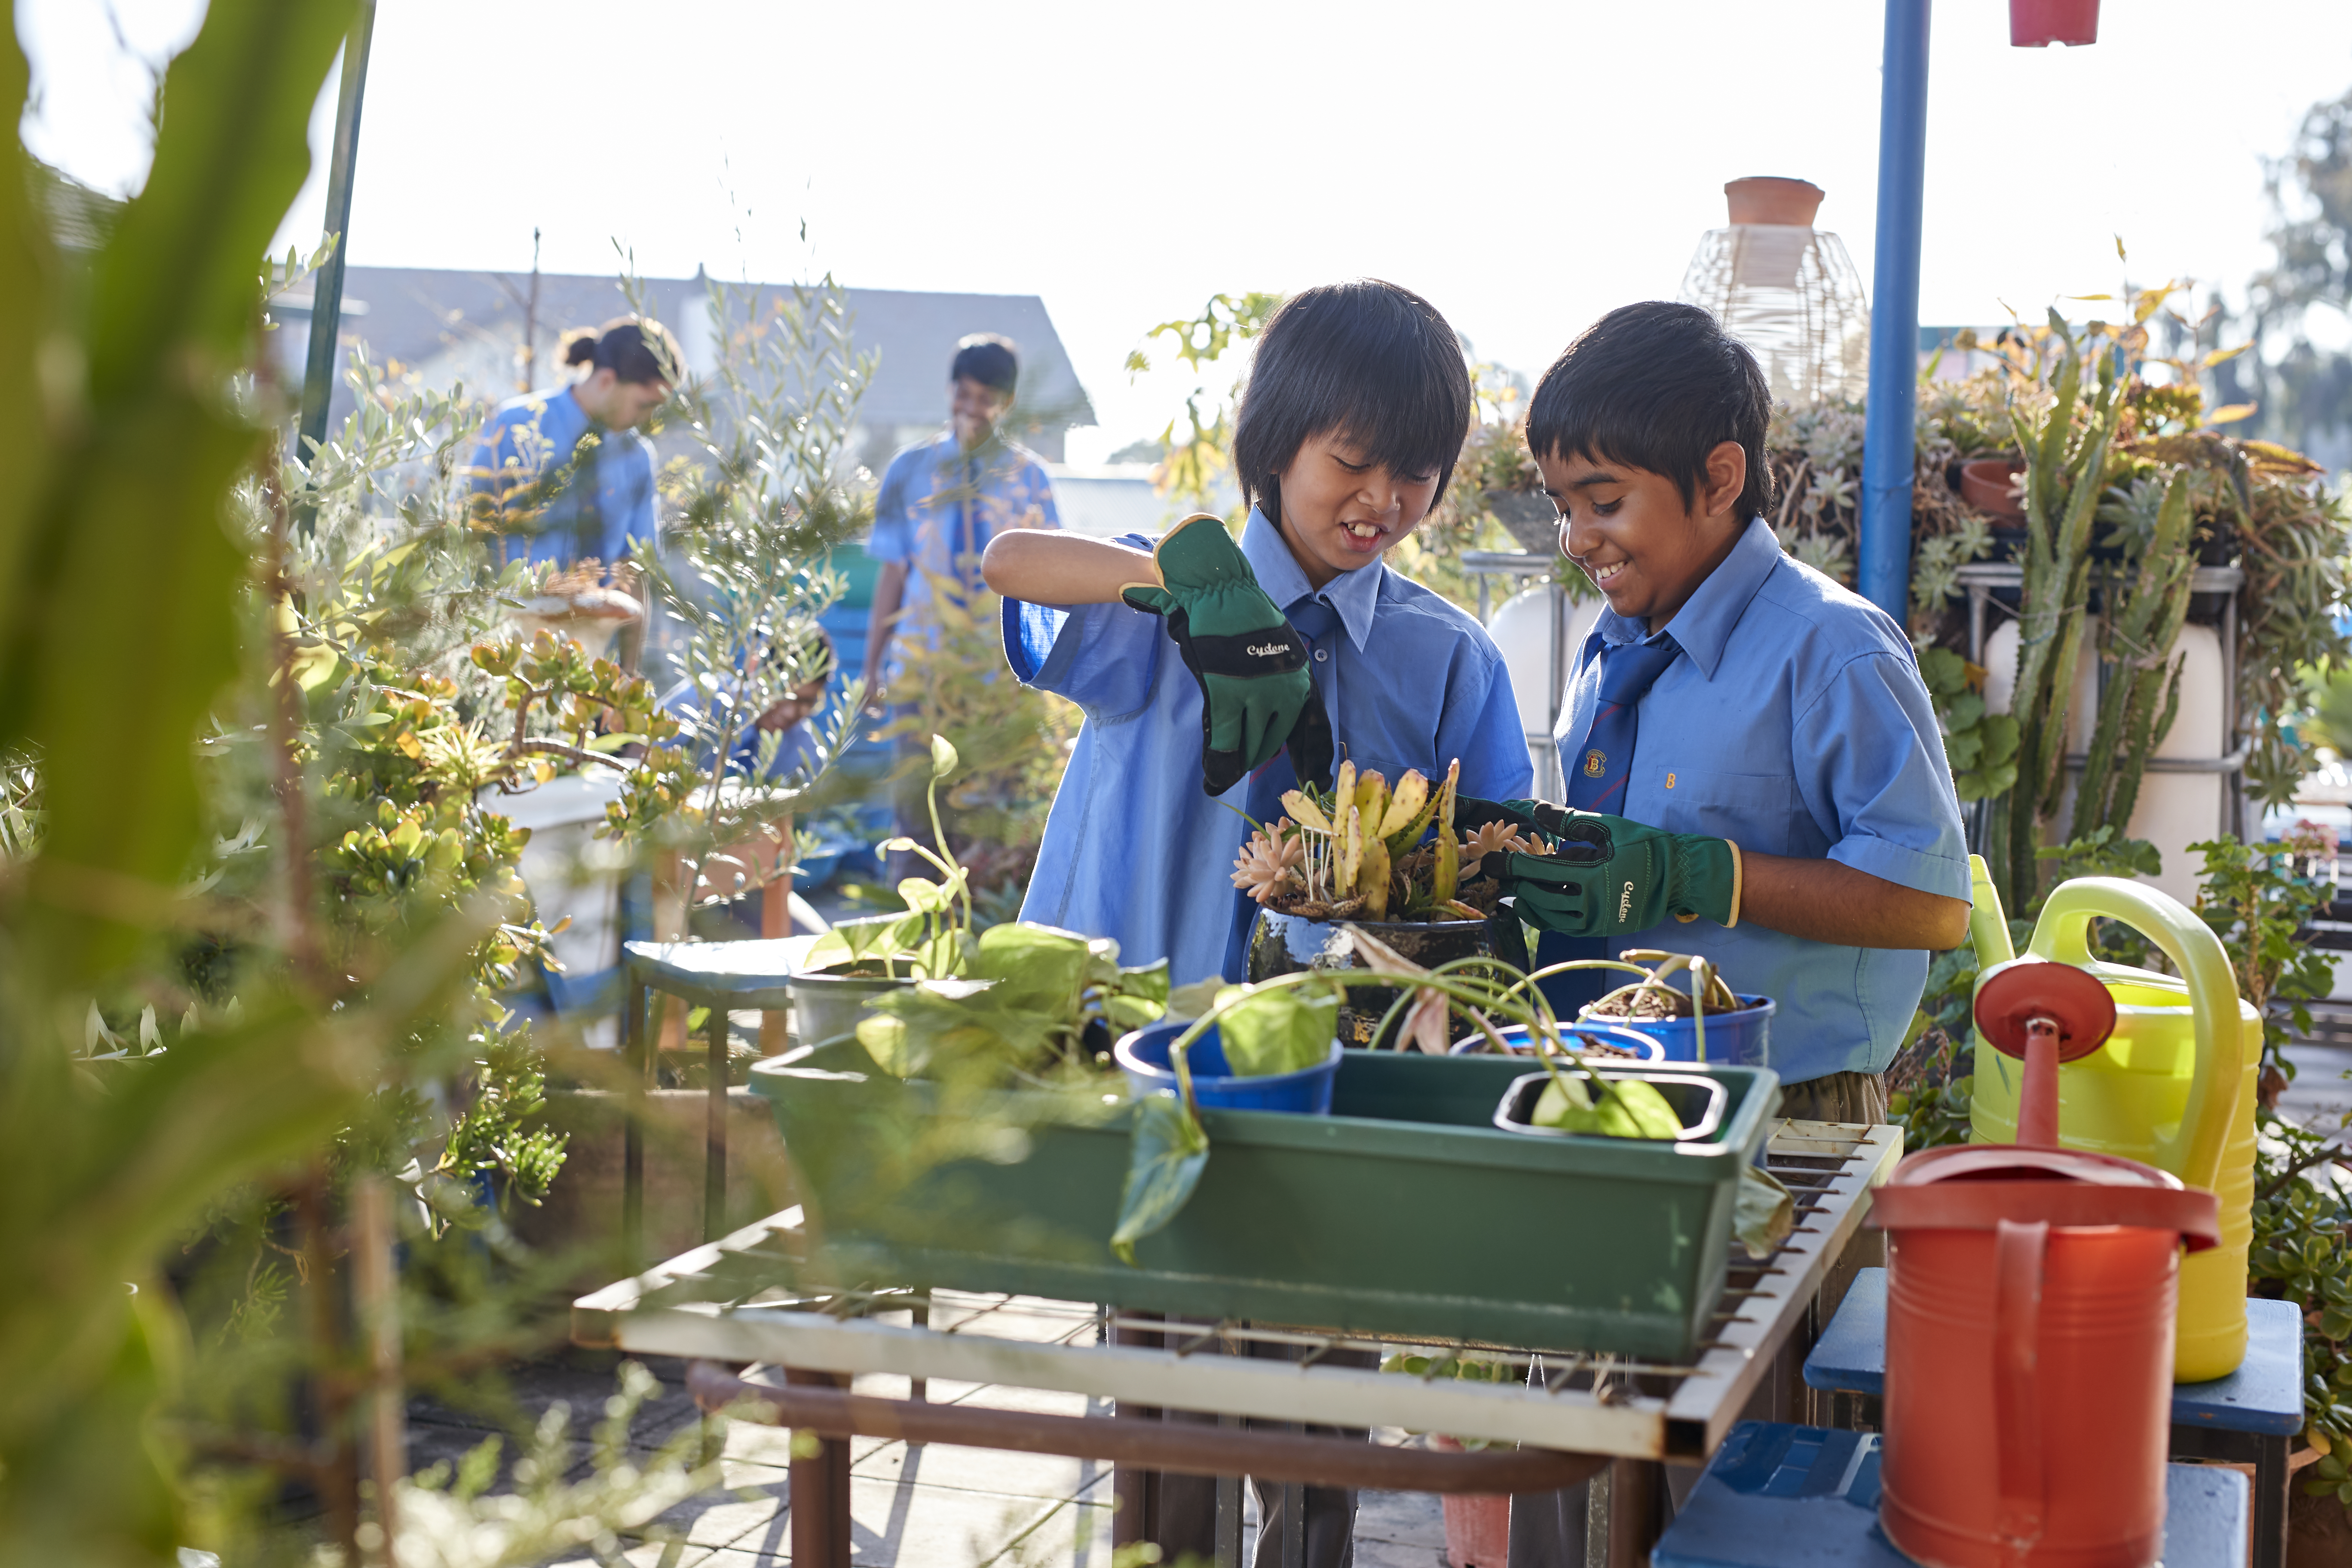 Students outside touching plants with gloves